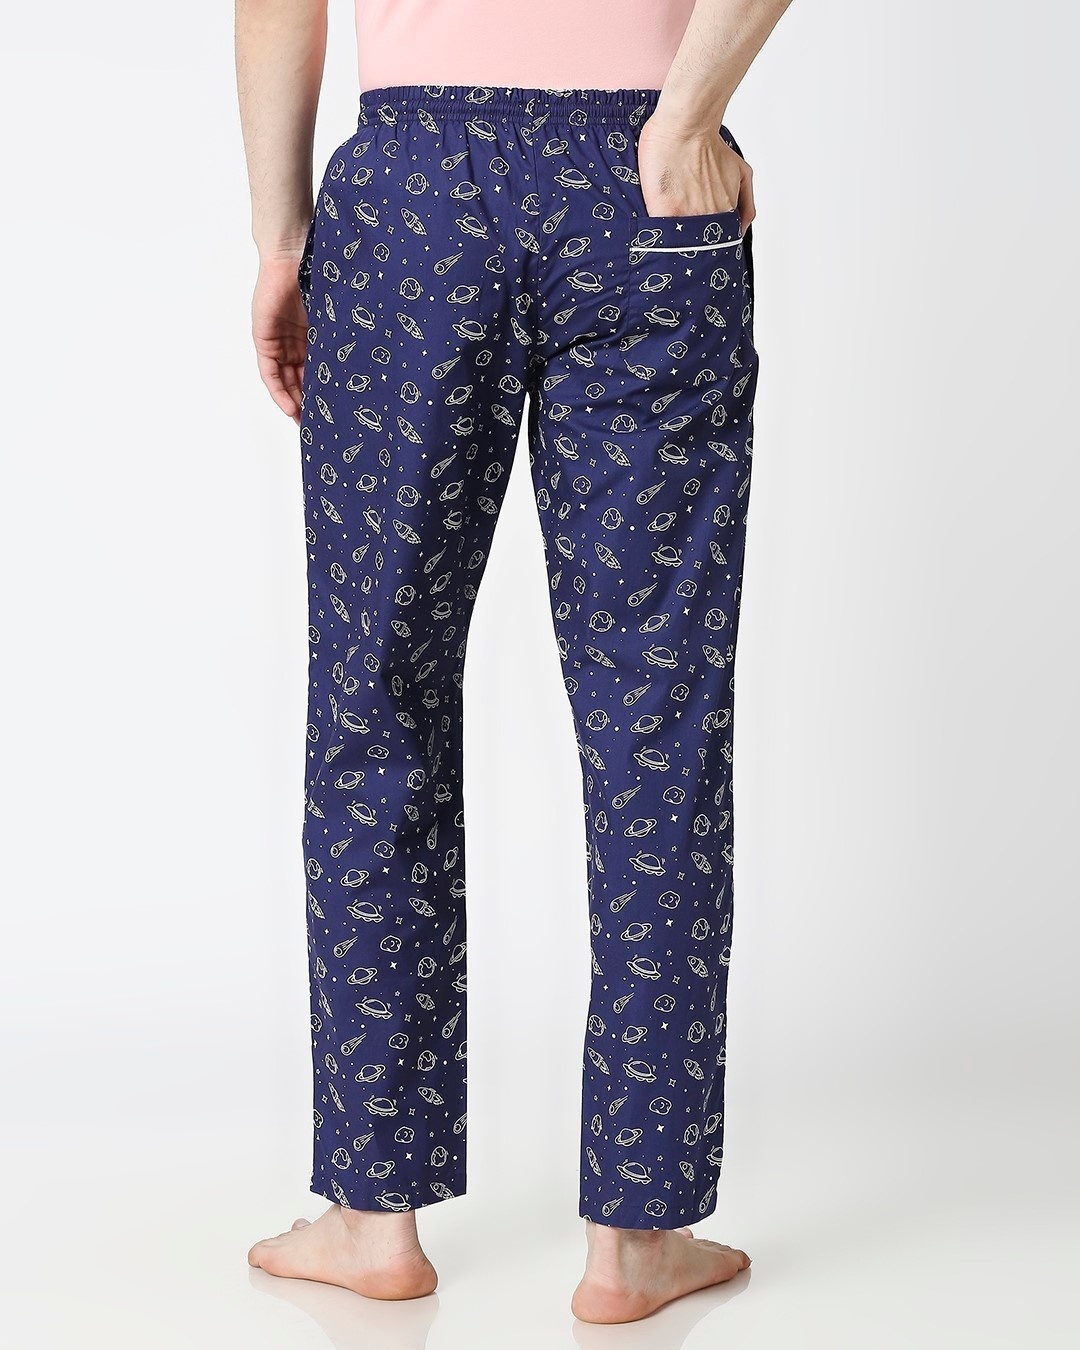 Shop Outer Space All Over Printed Pyjama-Design